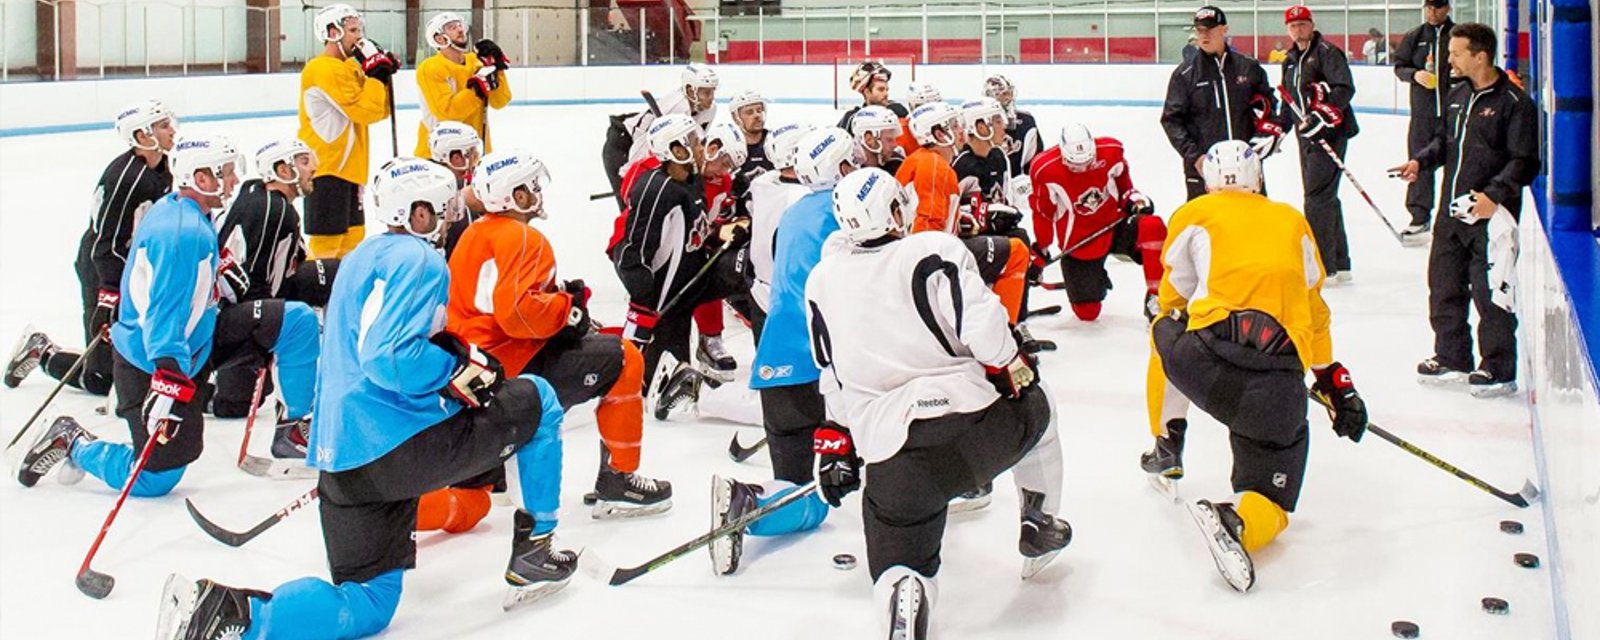 Report: NHL training camps to open July 10th